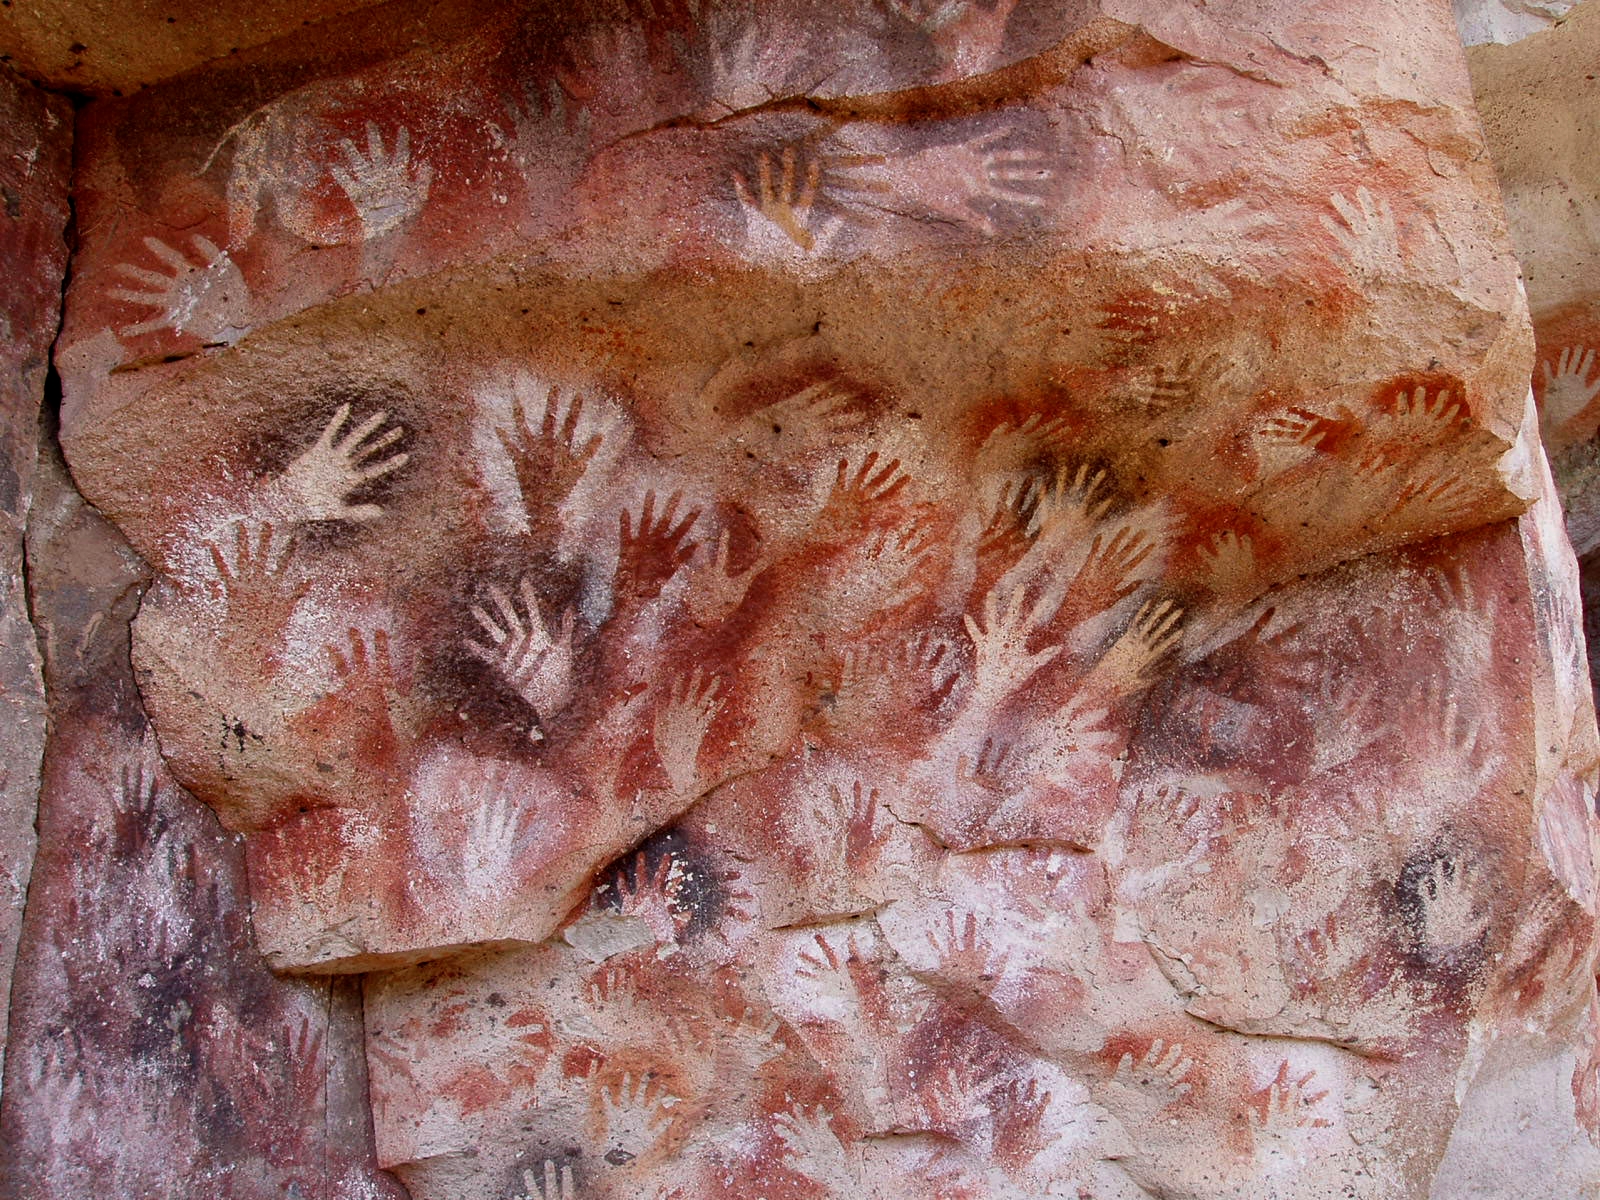 Cave paintings showing stenciled hands